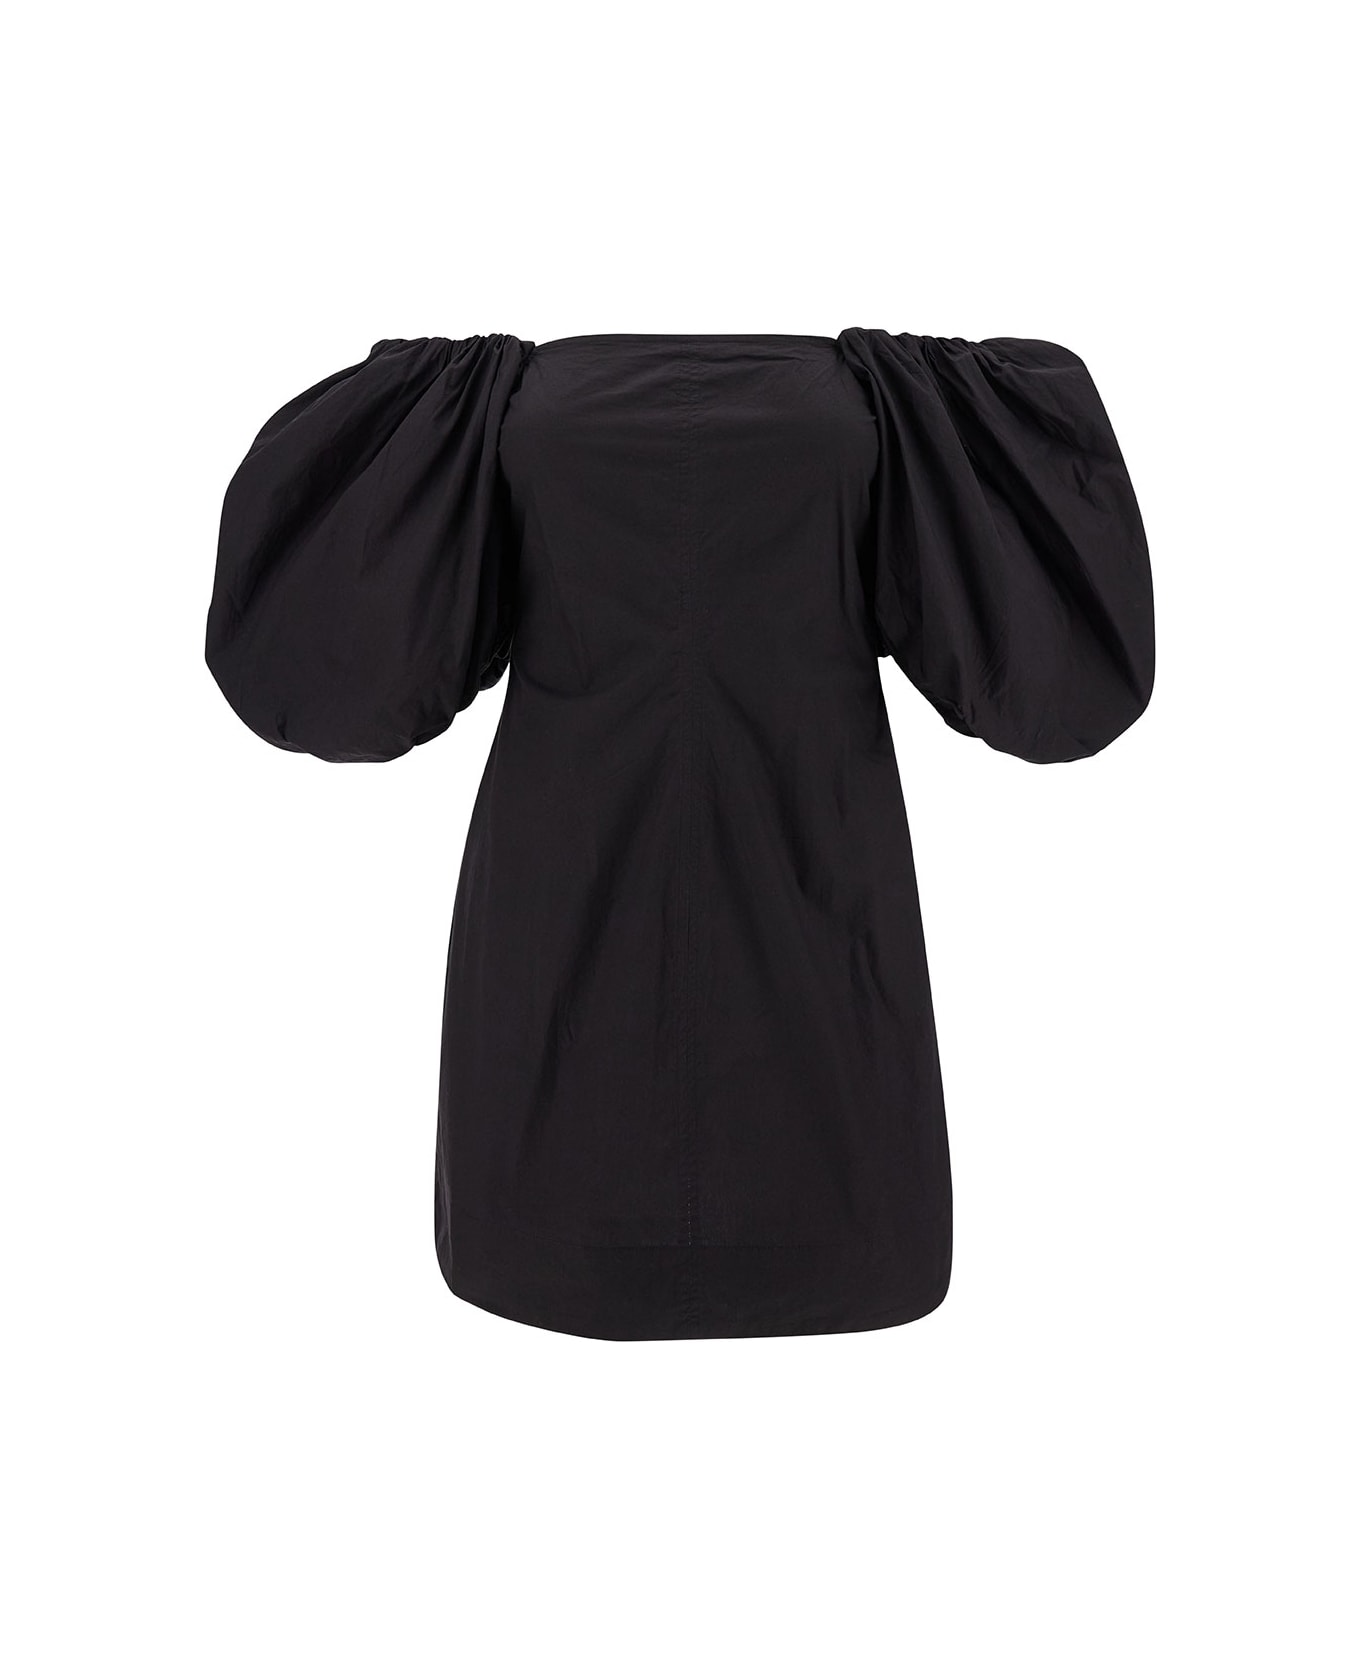 Ganni Mini Black Dress With Puff Sleeves In Cotton Woman - Black トップス